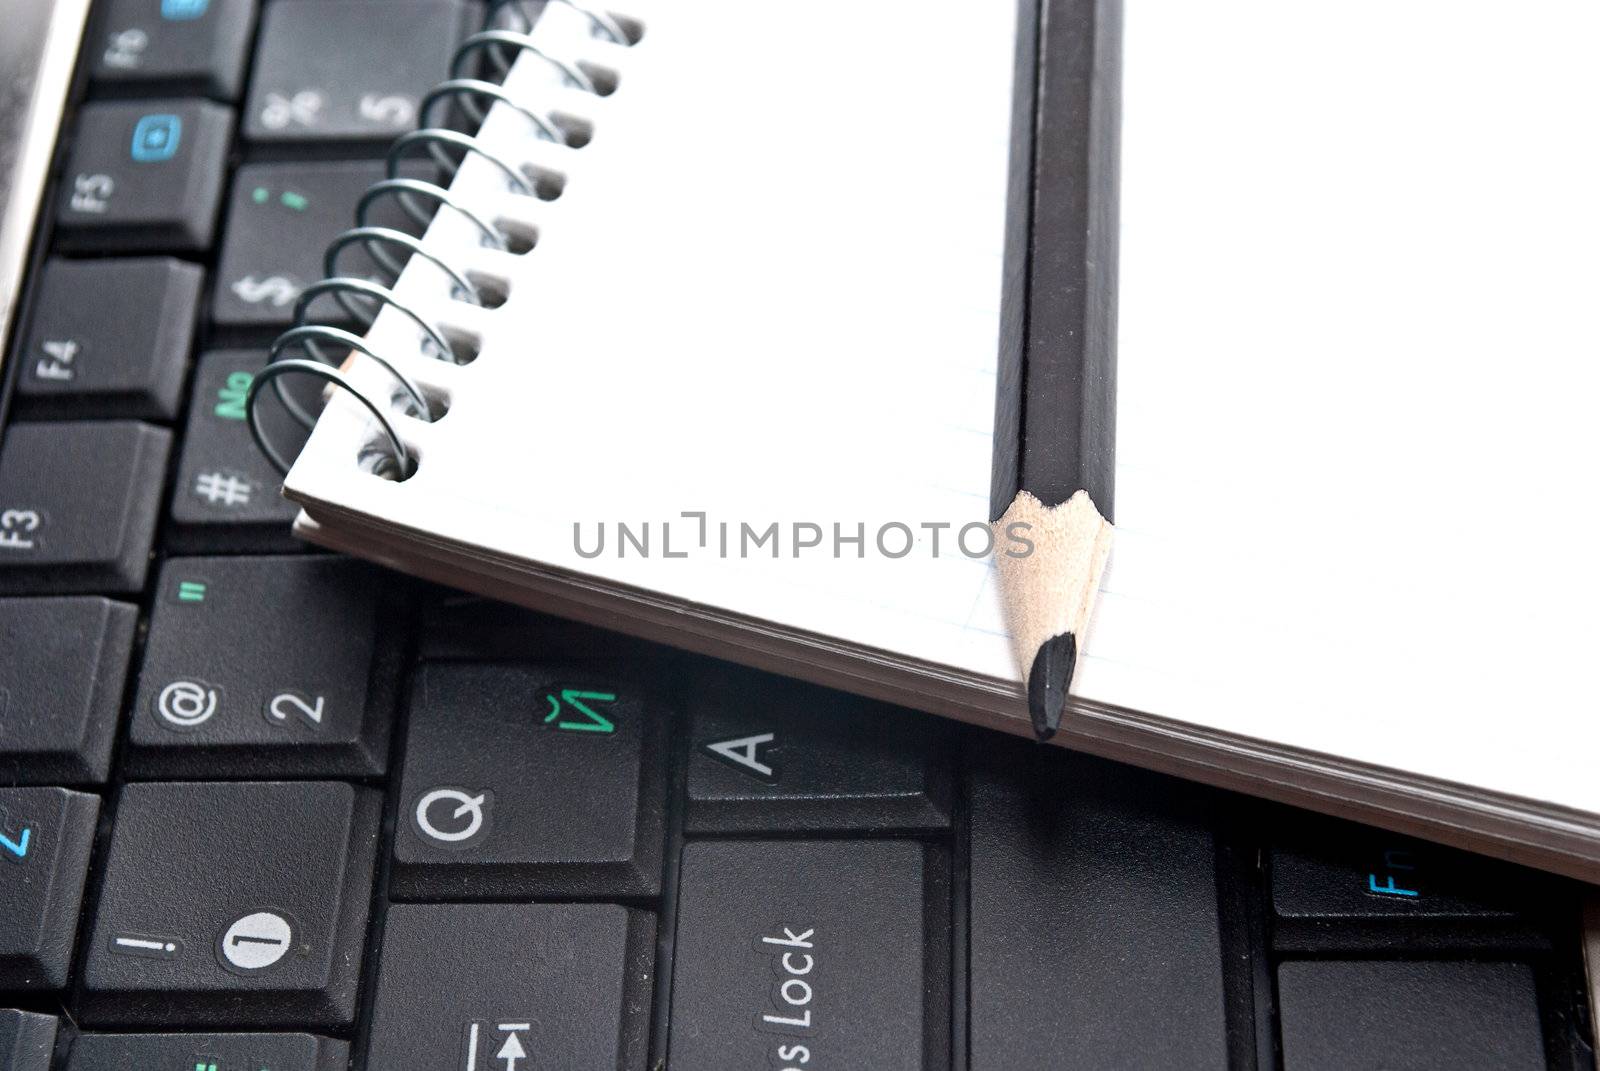 Collected notes over a laptop by Diversphoto